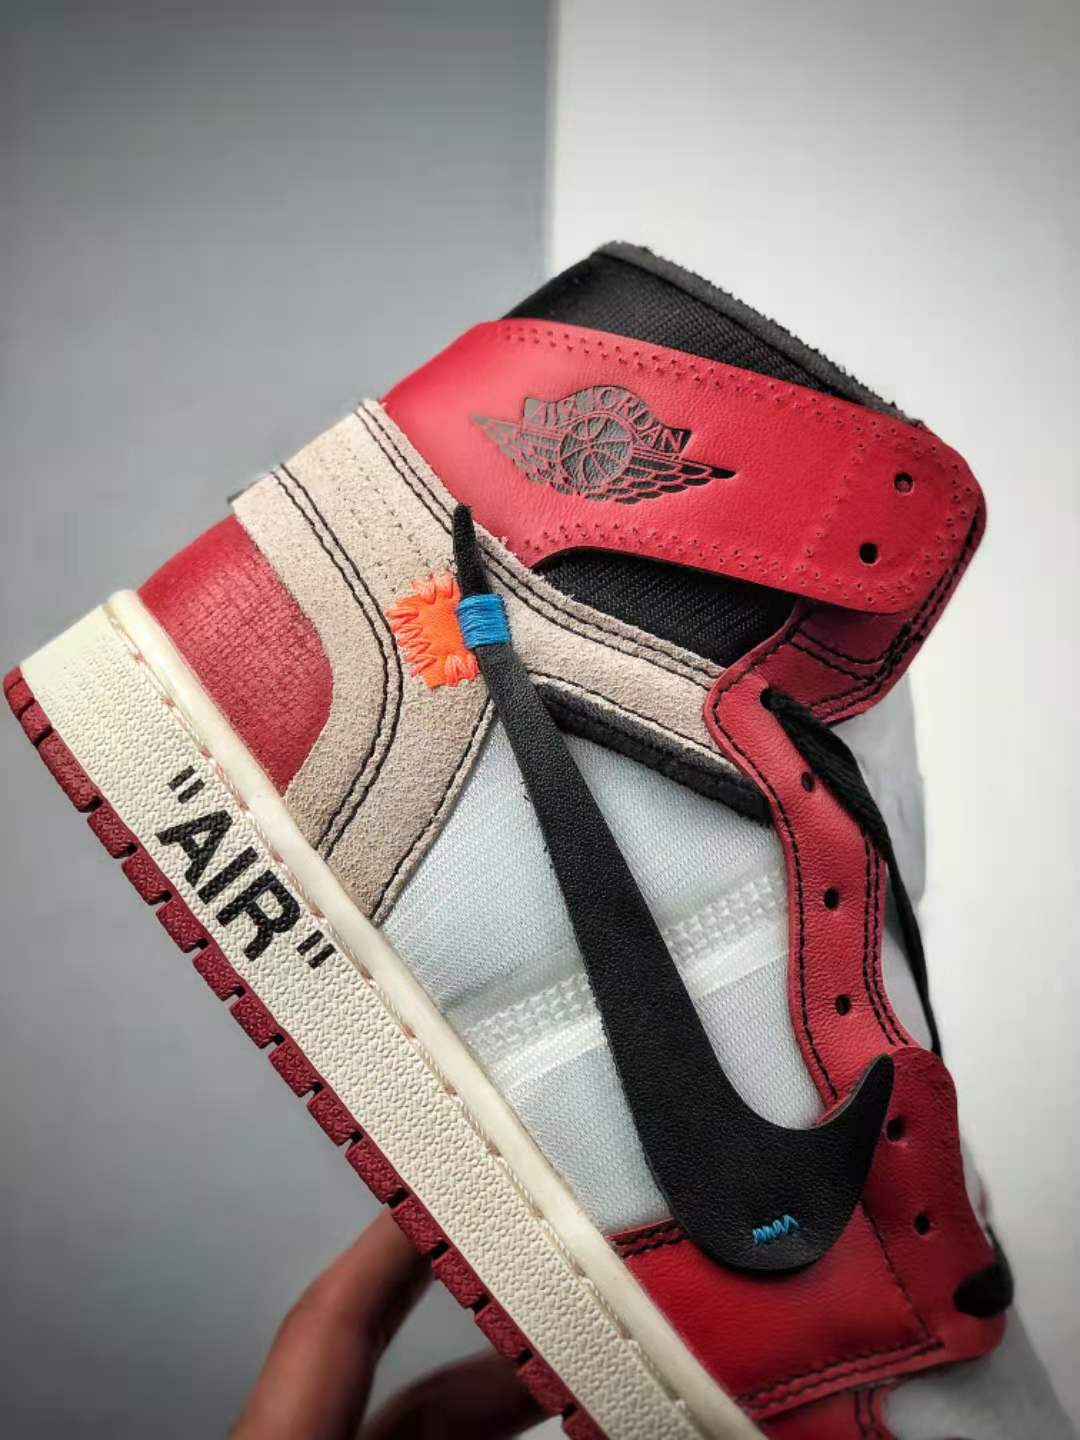 Off-White x Air Jordan 1 Retro High OG 'Chicago' AA3834-101 | Limited Edition Sneakers